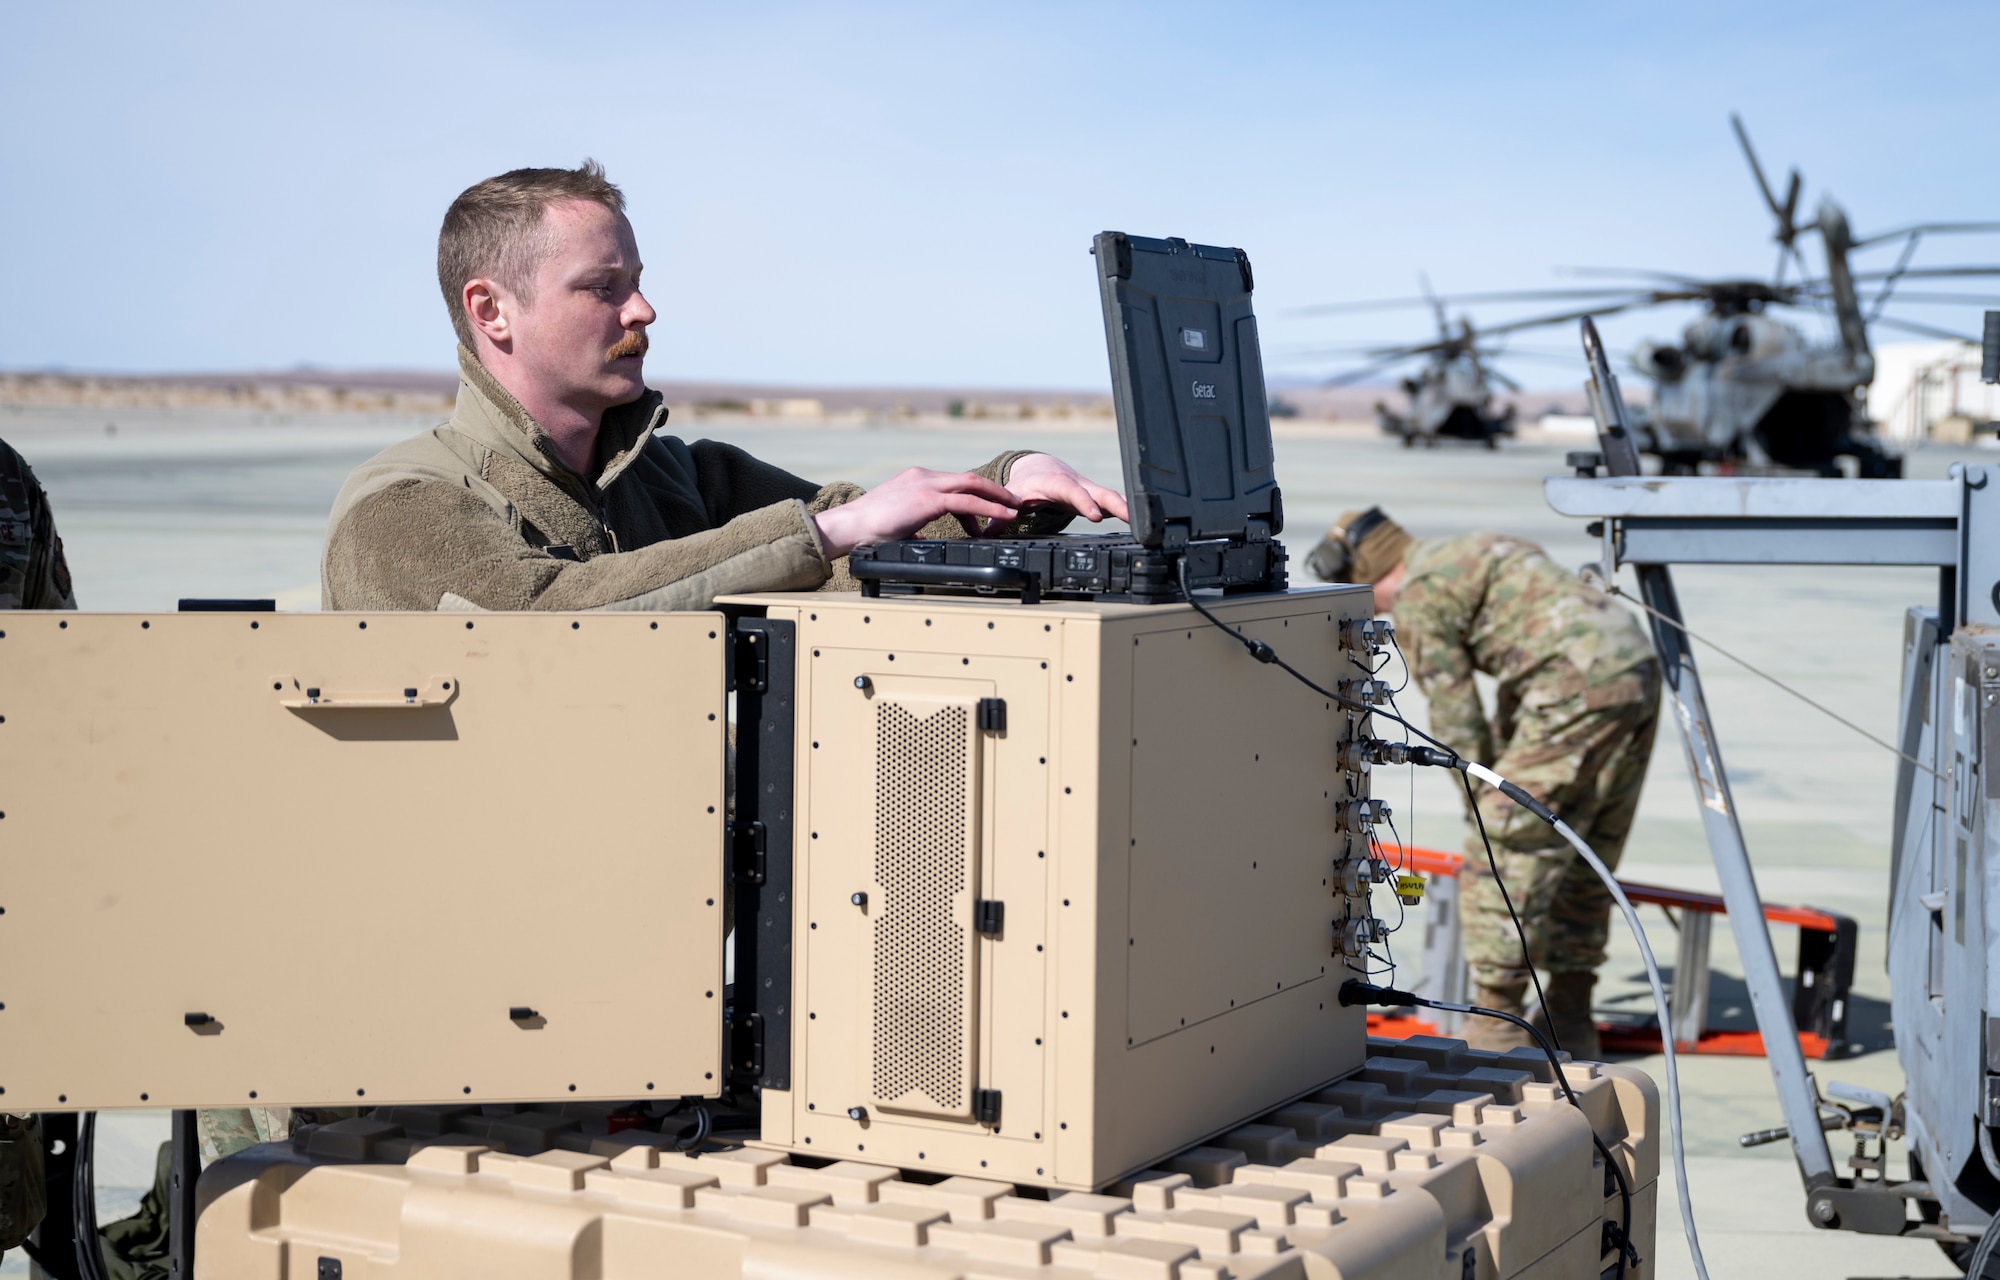 U.S. Air Force Staff Sgt. Shaun Shaffer, 29th Aircraft Maintenance Unit assisted dedicated crew chief, uses a Portable Aircraft Control Station at Marine Corps Air Ground Combat Command Center, Twentynine Palms, California, Feb. 16, 2023. Agile Combat Employment Reaper 23.6 is an exercise that was conducted between Holloman Air Force Base, Cannon AFB, N.M., Creech AFB, Nevada, and the U.S. Marines at Twentynine Palms. (U.S. Air Force photo by Staff Sgt. Kristin West)